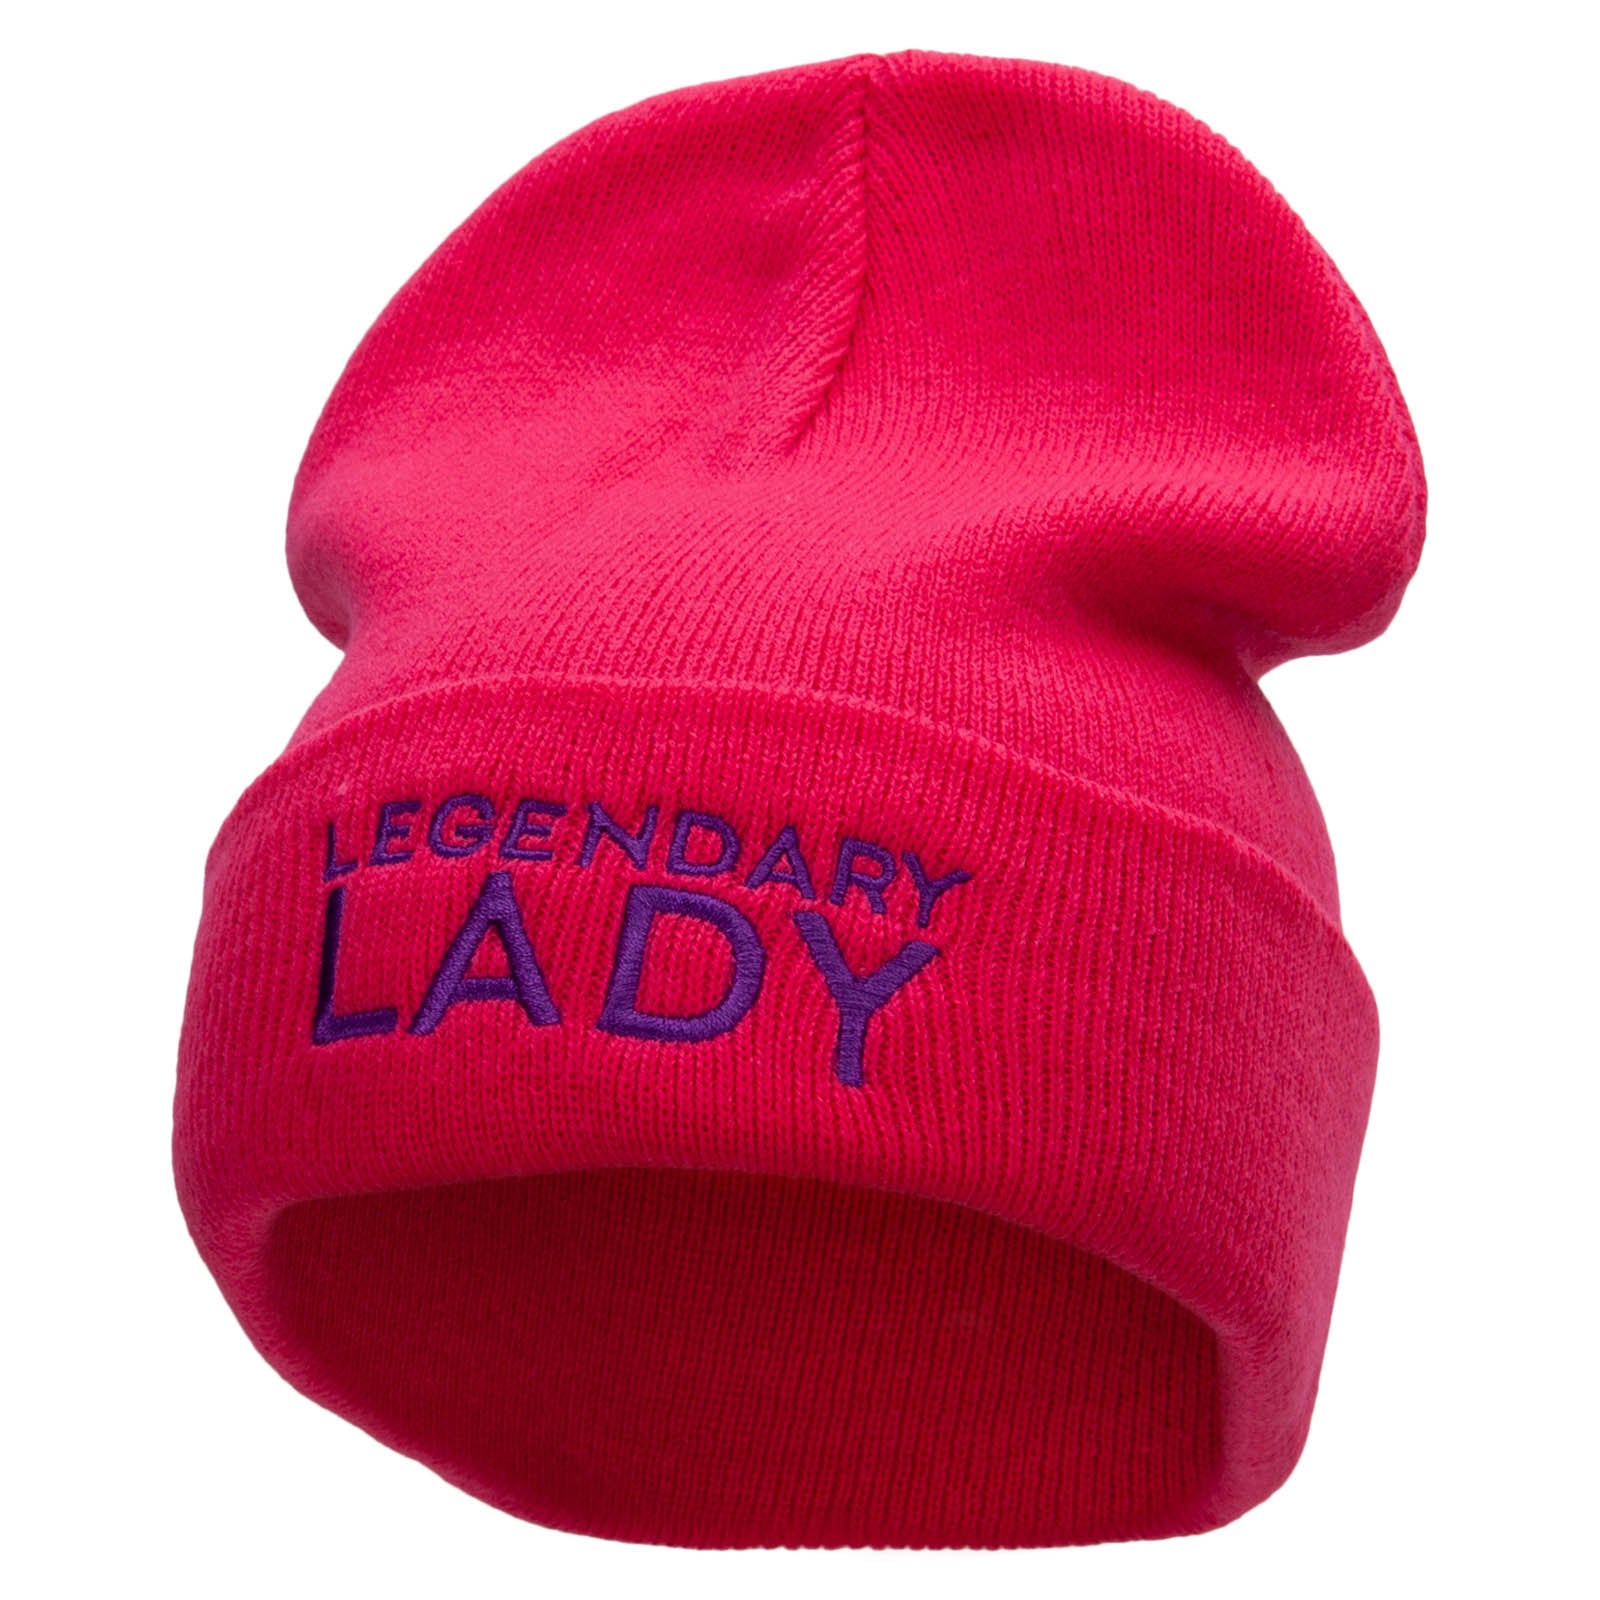 Legendary Lady Embroidered 12 Inch Long Knitted Beanie - Magenta OSFM